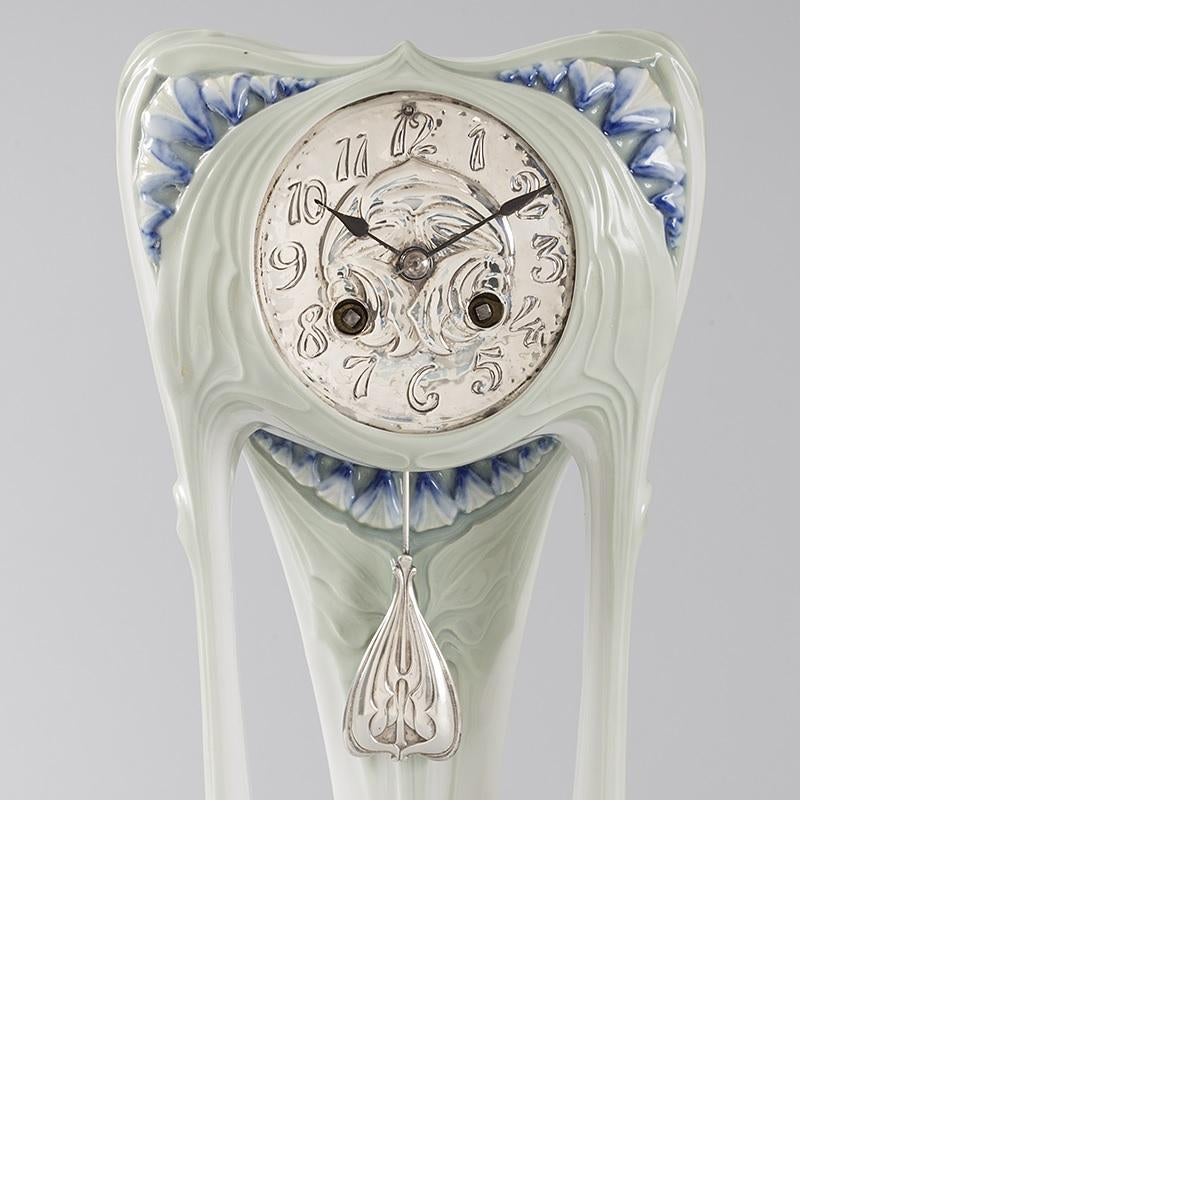 An Austrian Art Nouveau porcelain and silvered clock by Paul Follot. This clock heavily features the arabesquing line of the Art Nouveau movement, both in shape and in the relief decoration. Abstract blue flower buds decorate the clock in panels at